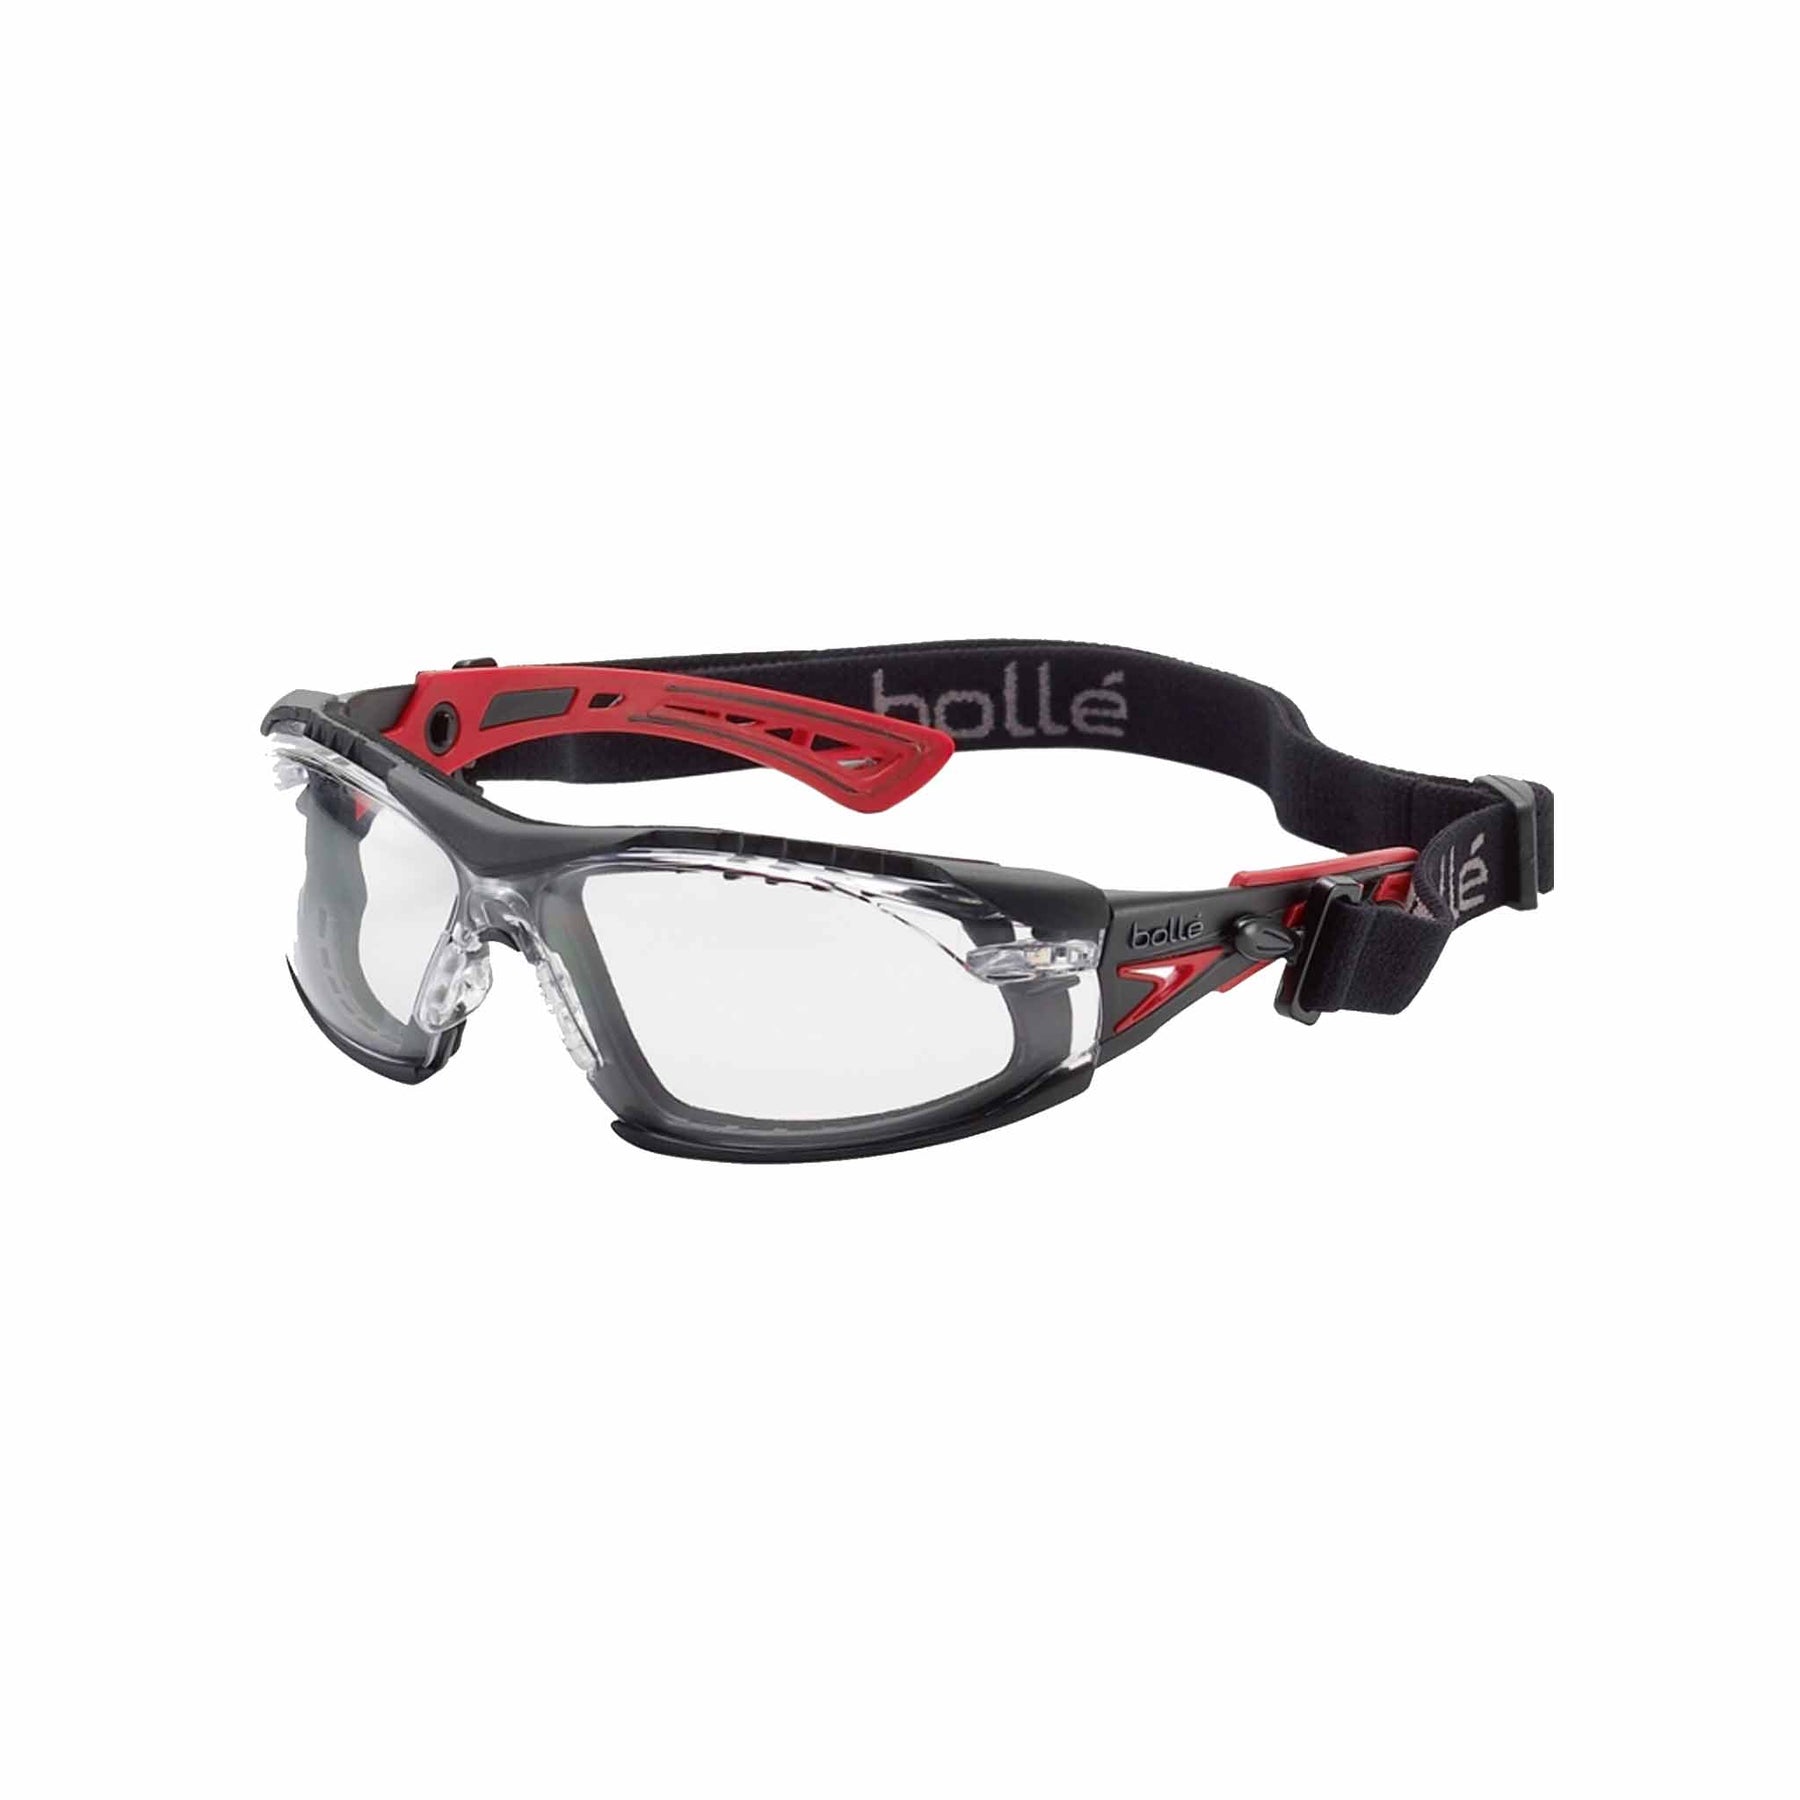 bolle rush plus seal glasses with clear lenses